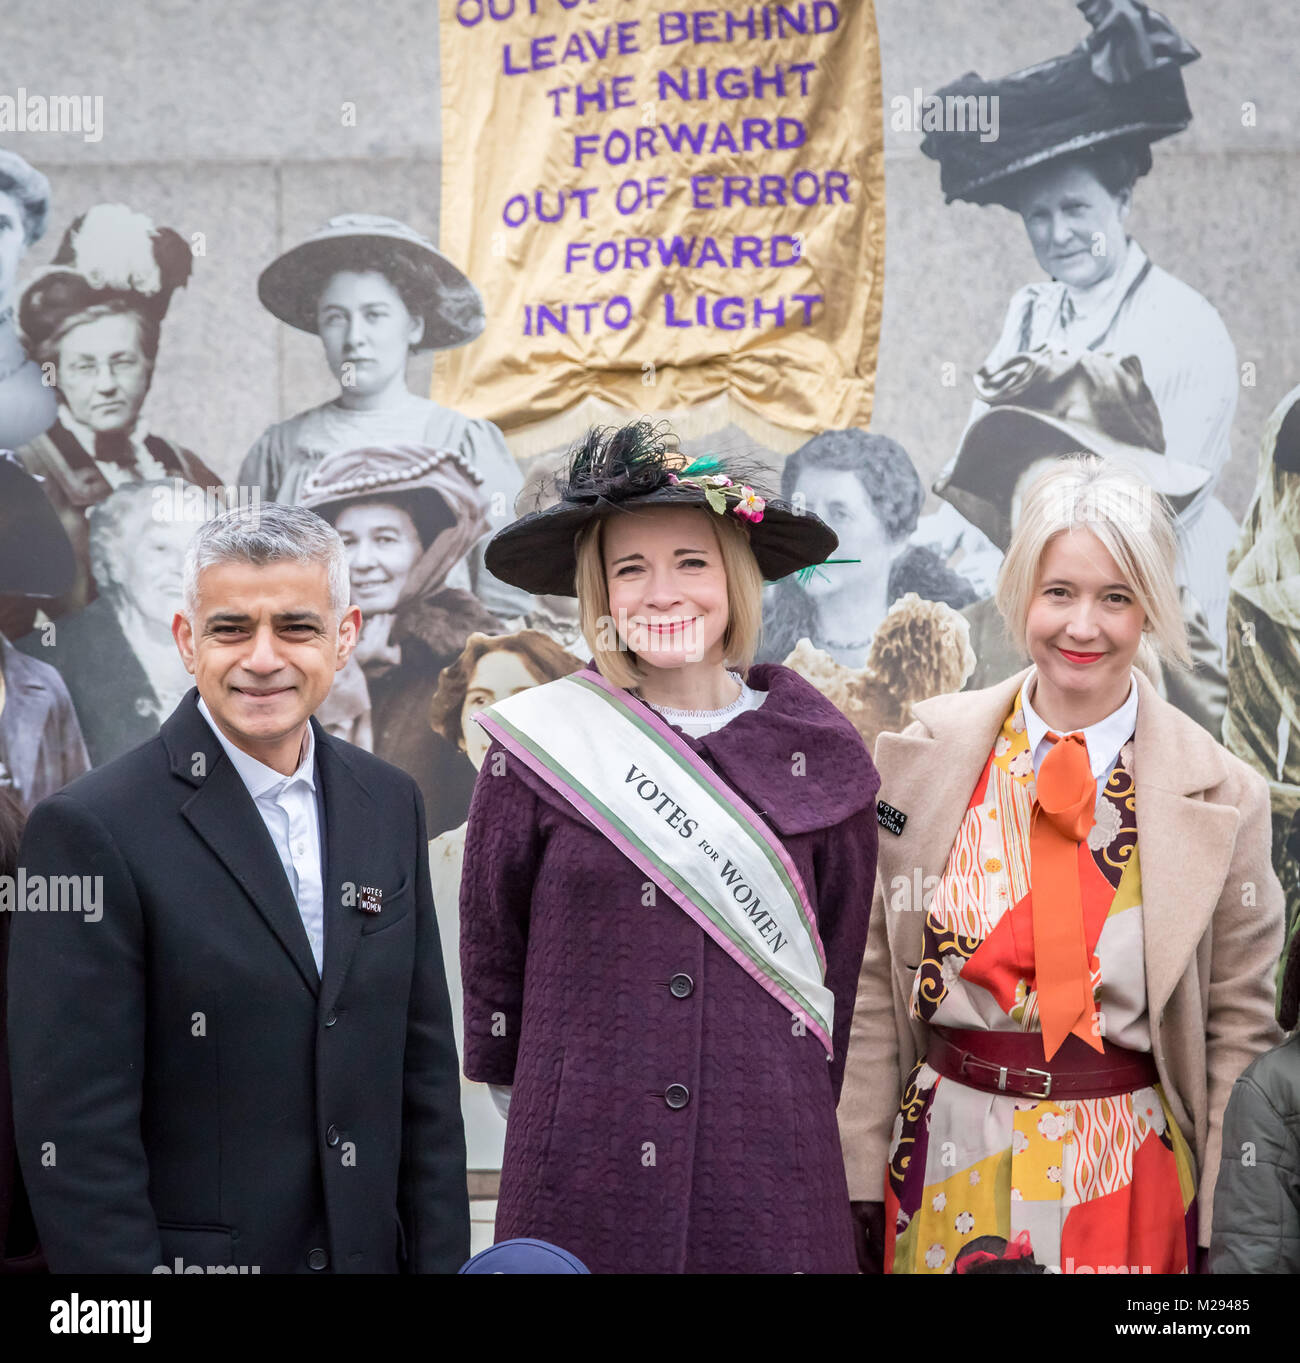 London, UK. 6th Feb, 2018. The Mayor of London including historian Lucy Worsley hosts a symbolic exhibition in Trafalgar Square marking 100 years since the 1918 Representation of the People Act was passed - a landmark victory which gave the first women the right to vote. Credit: Guy Corbishley/Alamy Live News Stock Photo